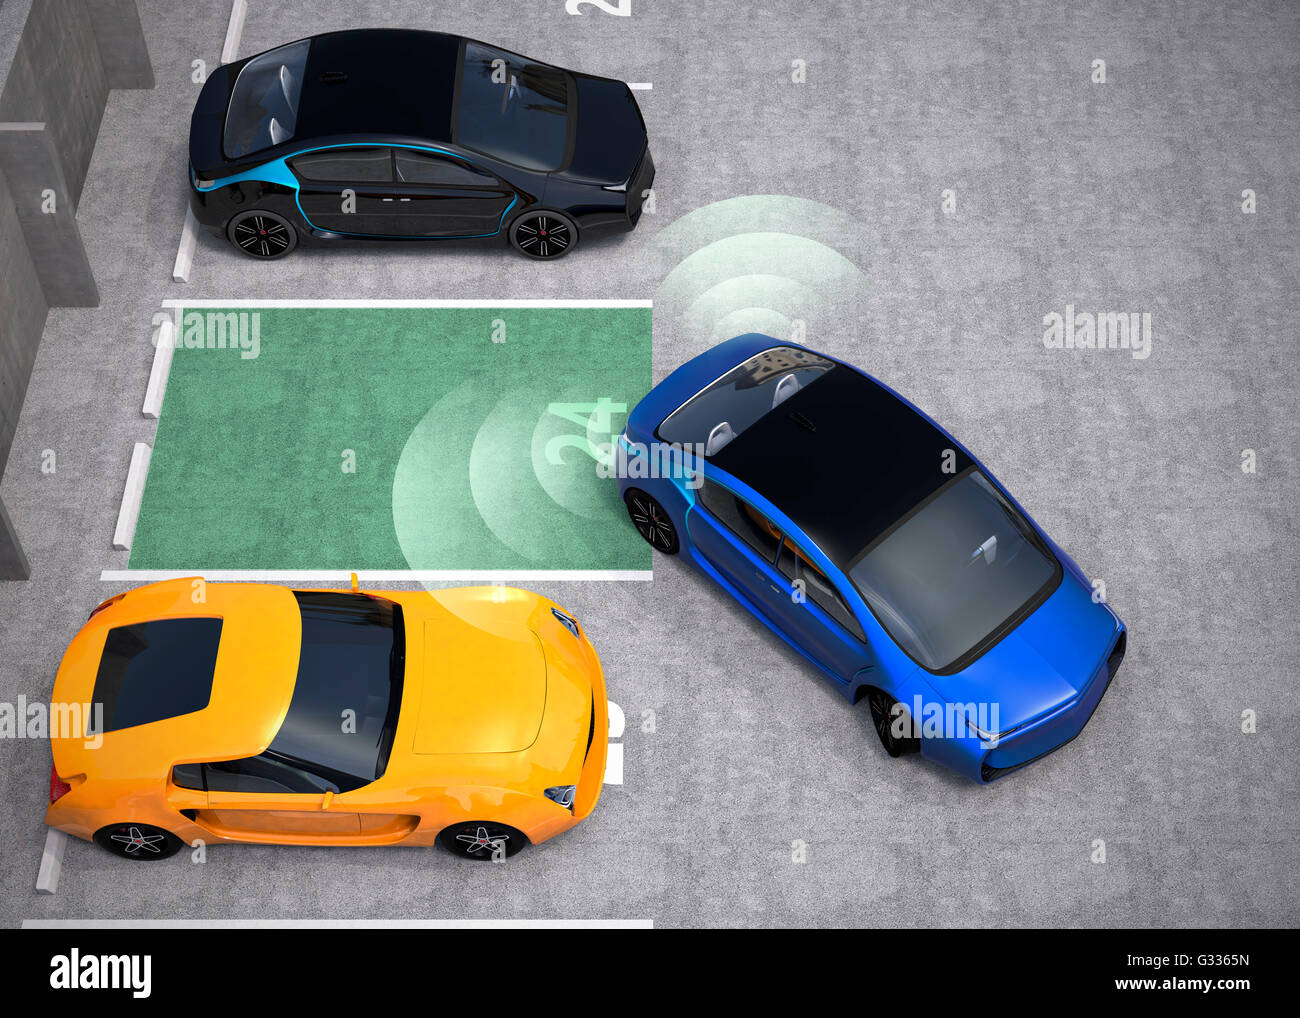 Blue electric car driving into parking lot with parking assist system. 3D rendering image. Stock Photo